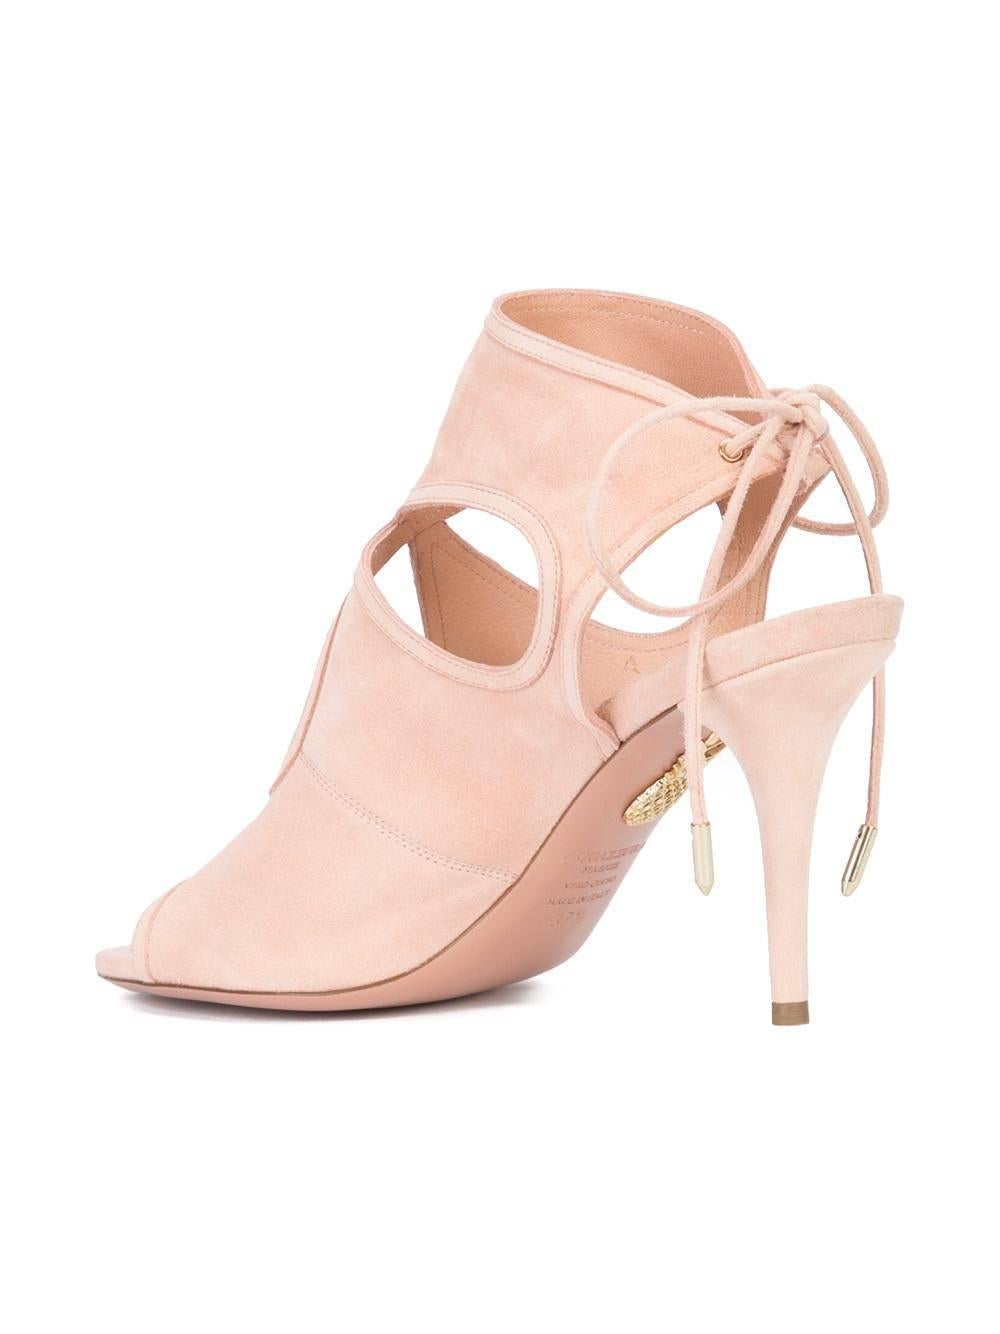 Aquazzura New Sold Out Pink Cashmere Suede Cut Out Sandals Heels in Box In New Condition In Chicago, IL